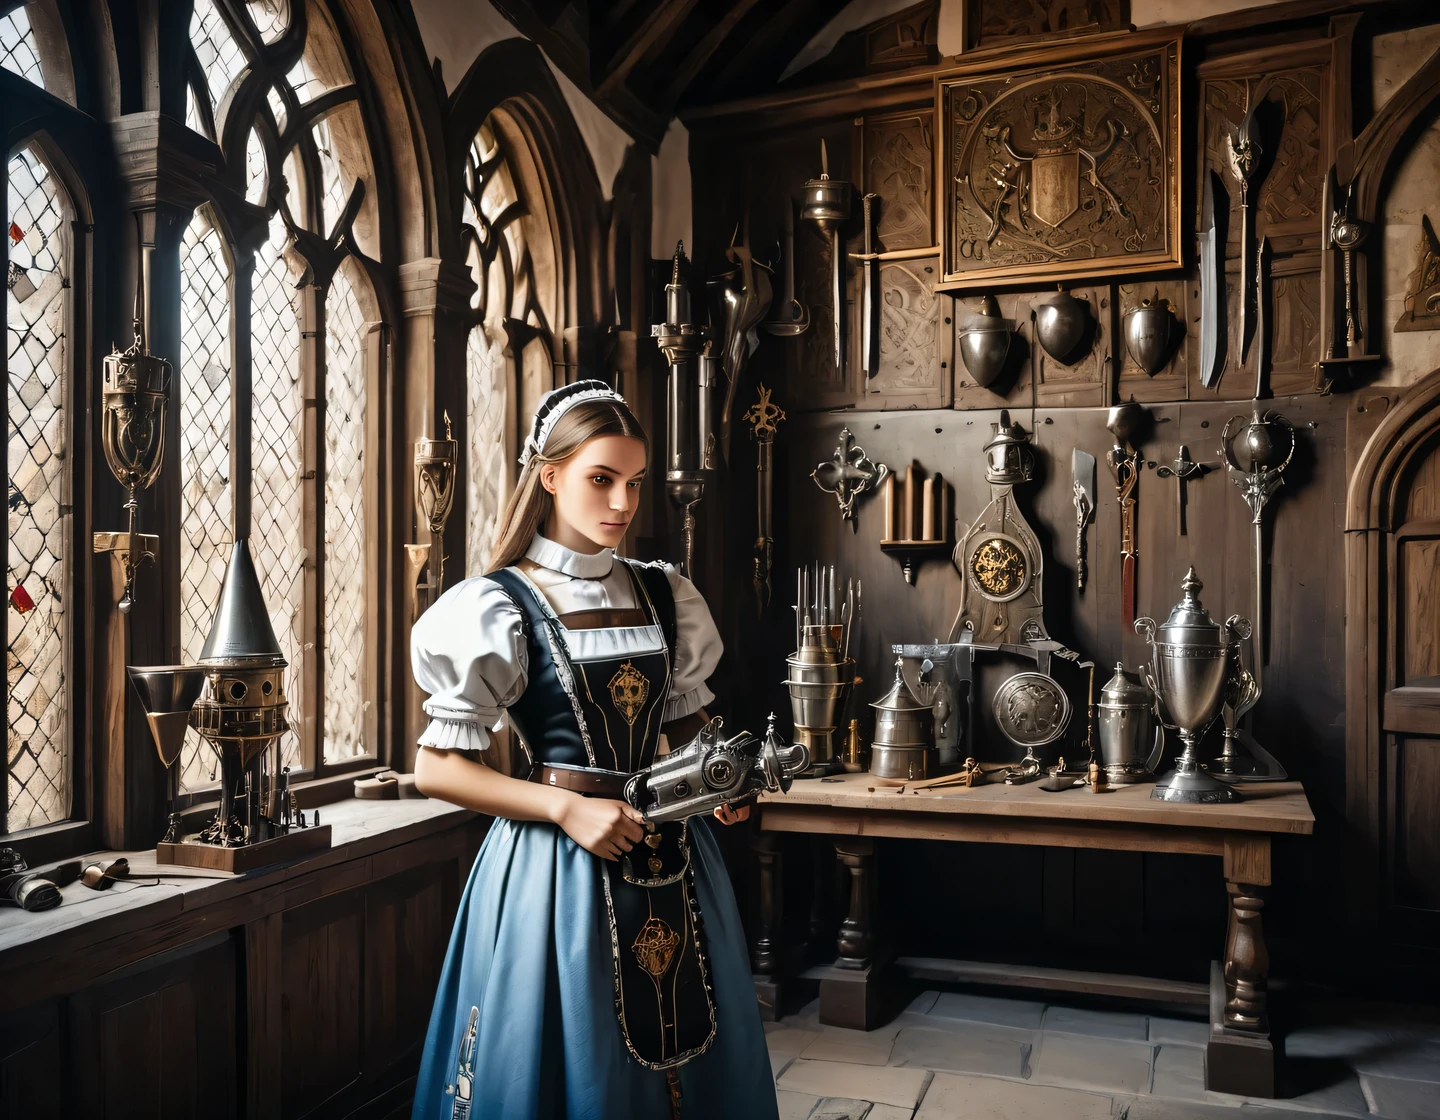 An ancient photograph, a cyborg girl in a maid outfit is building in the hall of a medieval castle, medieval furnishings, trophies and weapons on the walls, heraldry, realistic